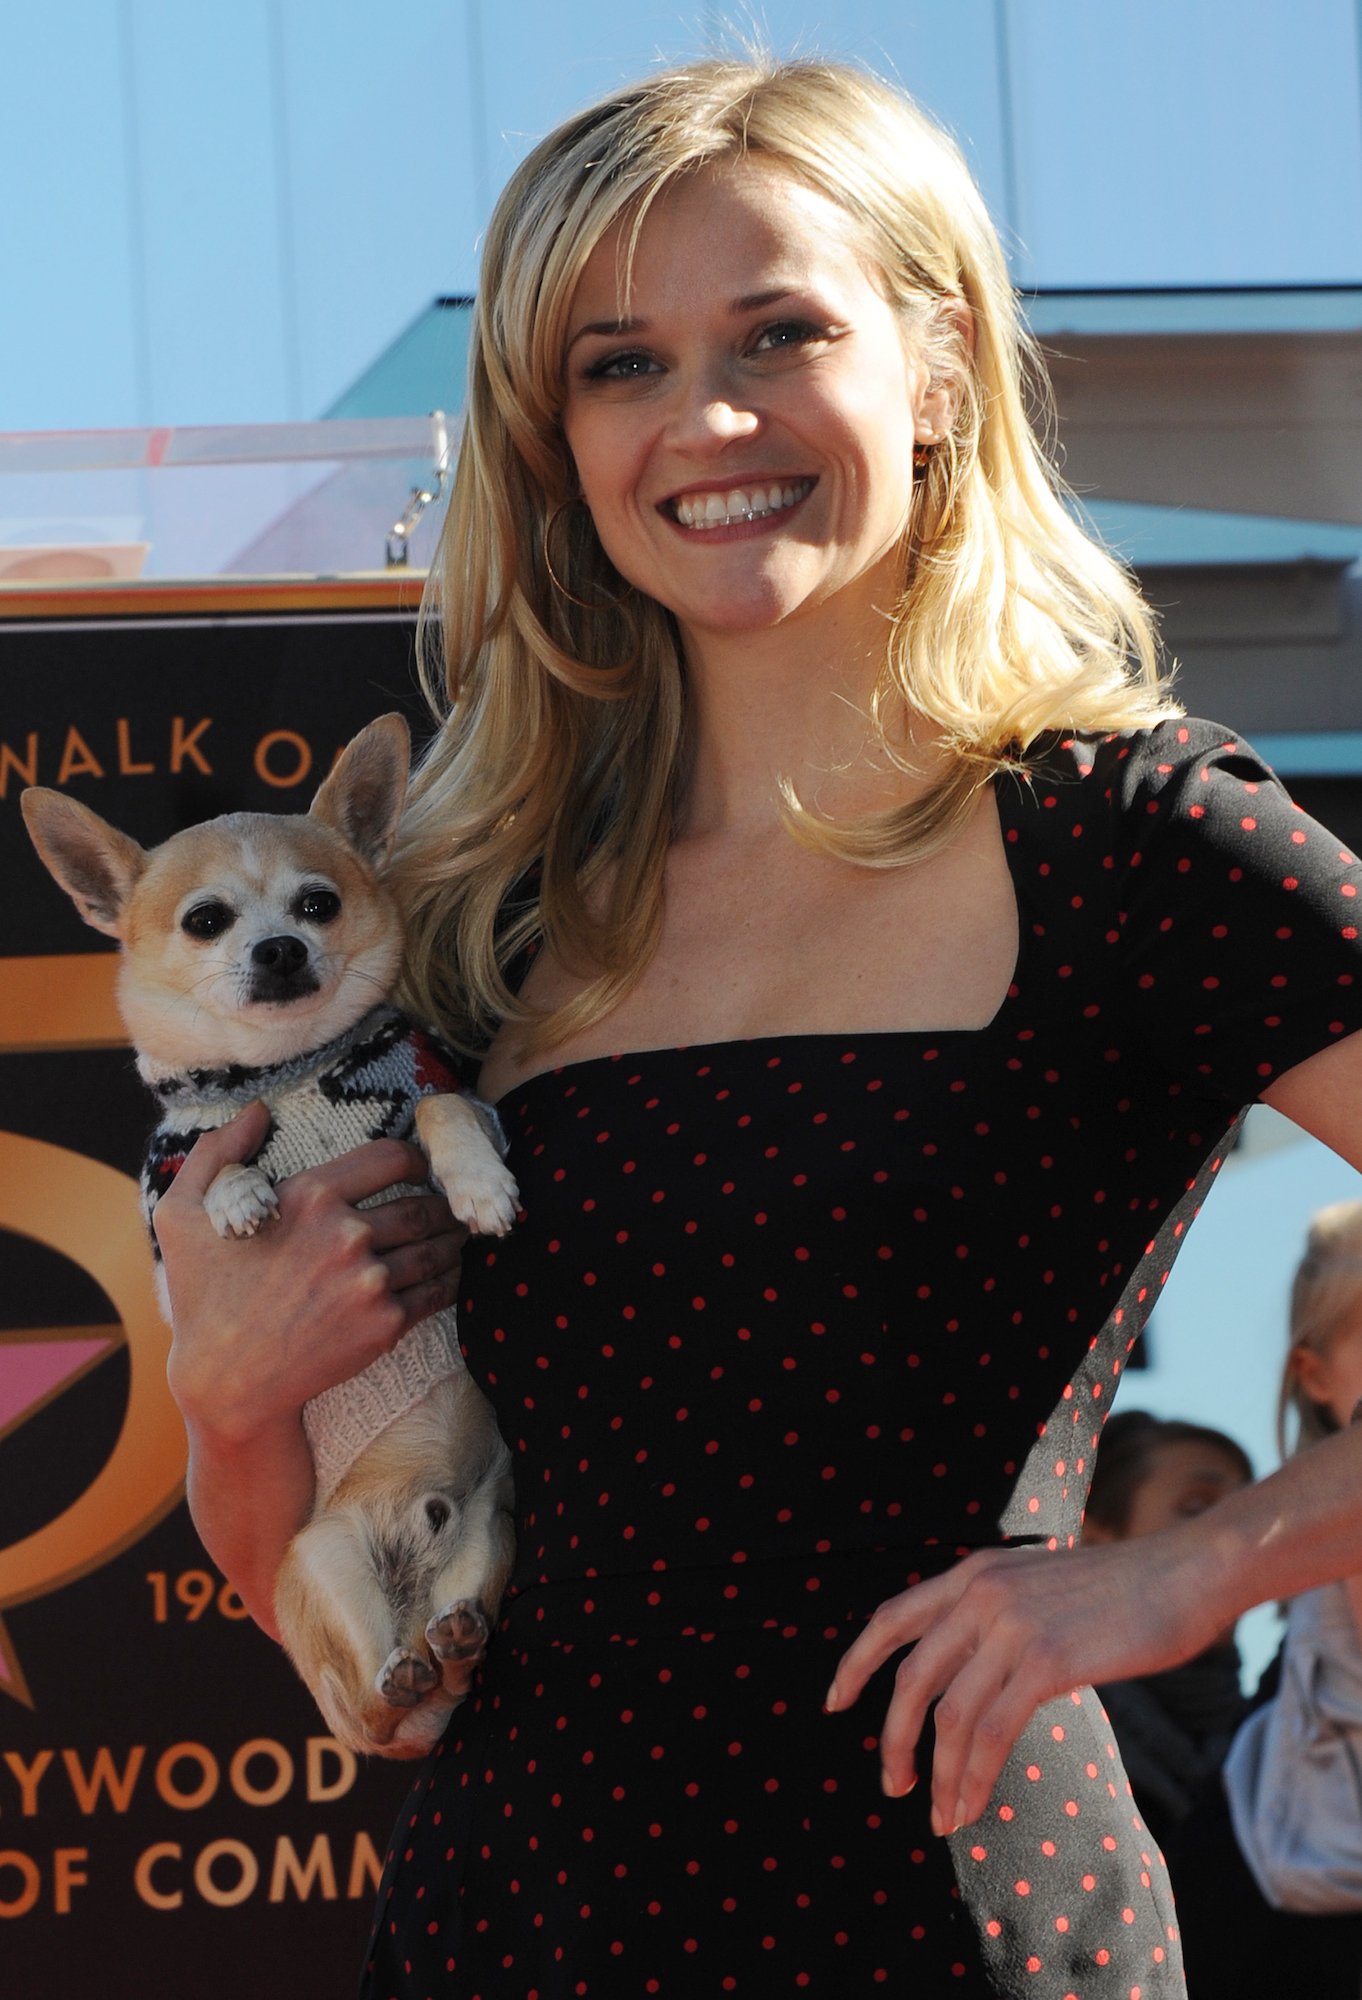 Reese Witherspoon and her 'Legally Blonde' co-star Bruiser posing at her Hollywood Walk of Fame ceremony